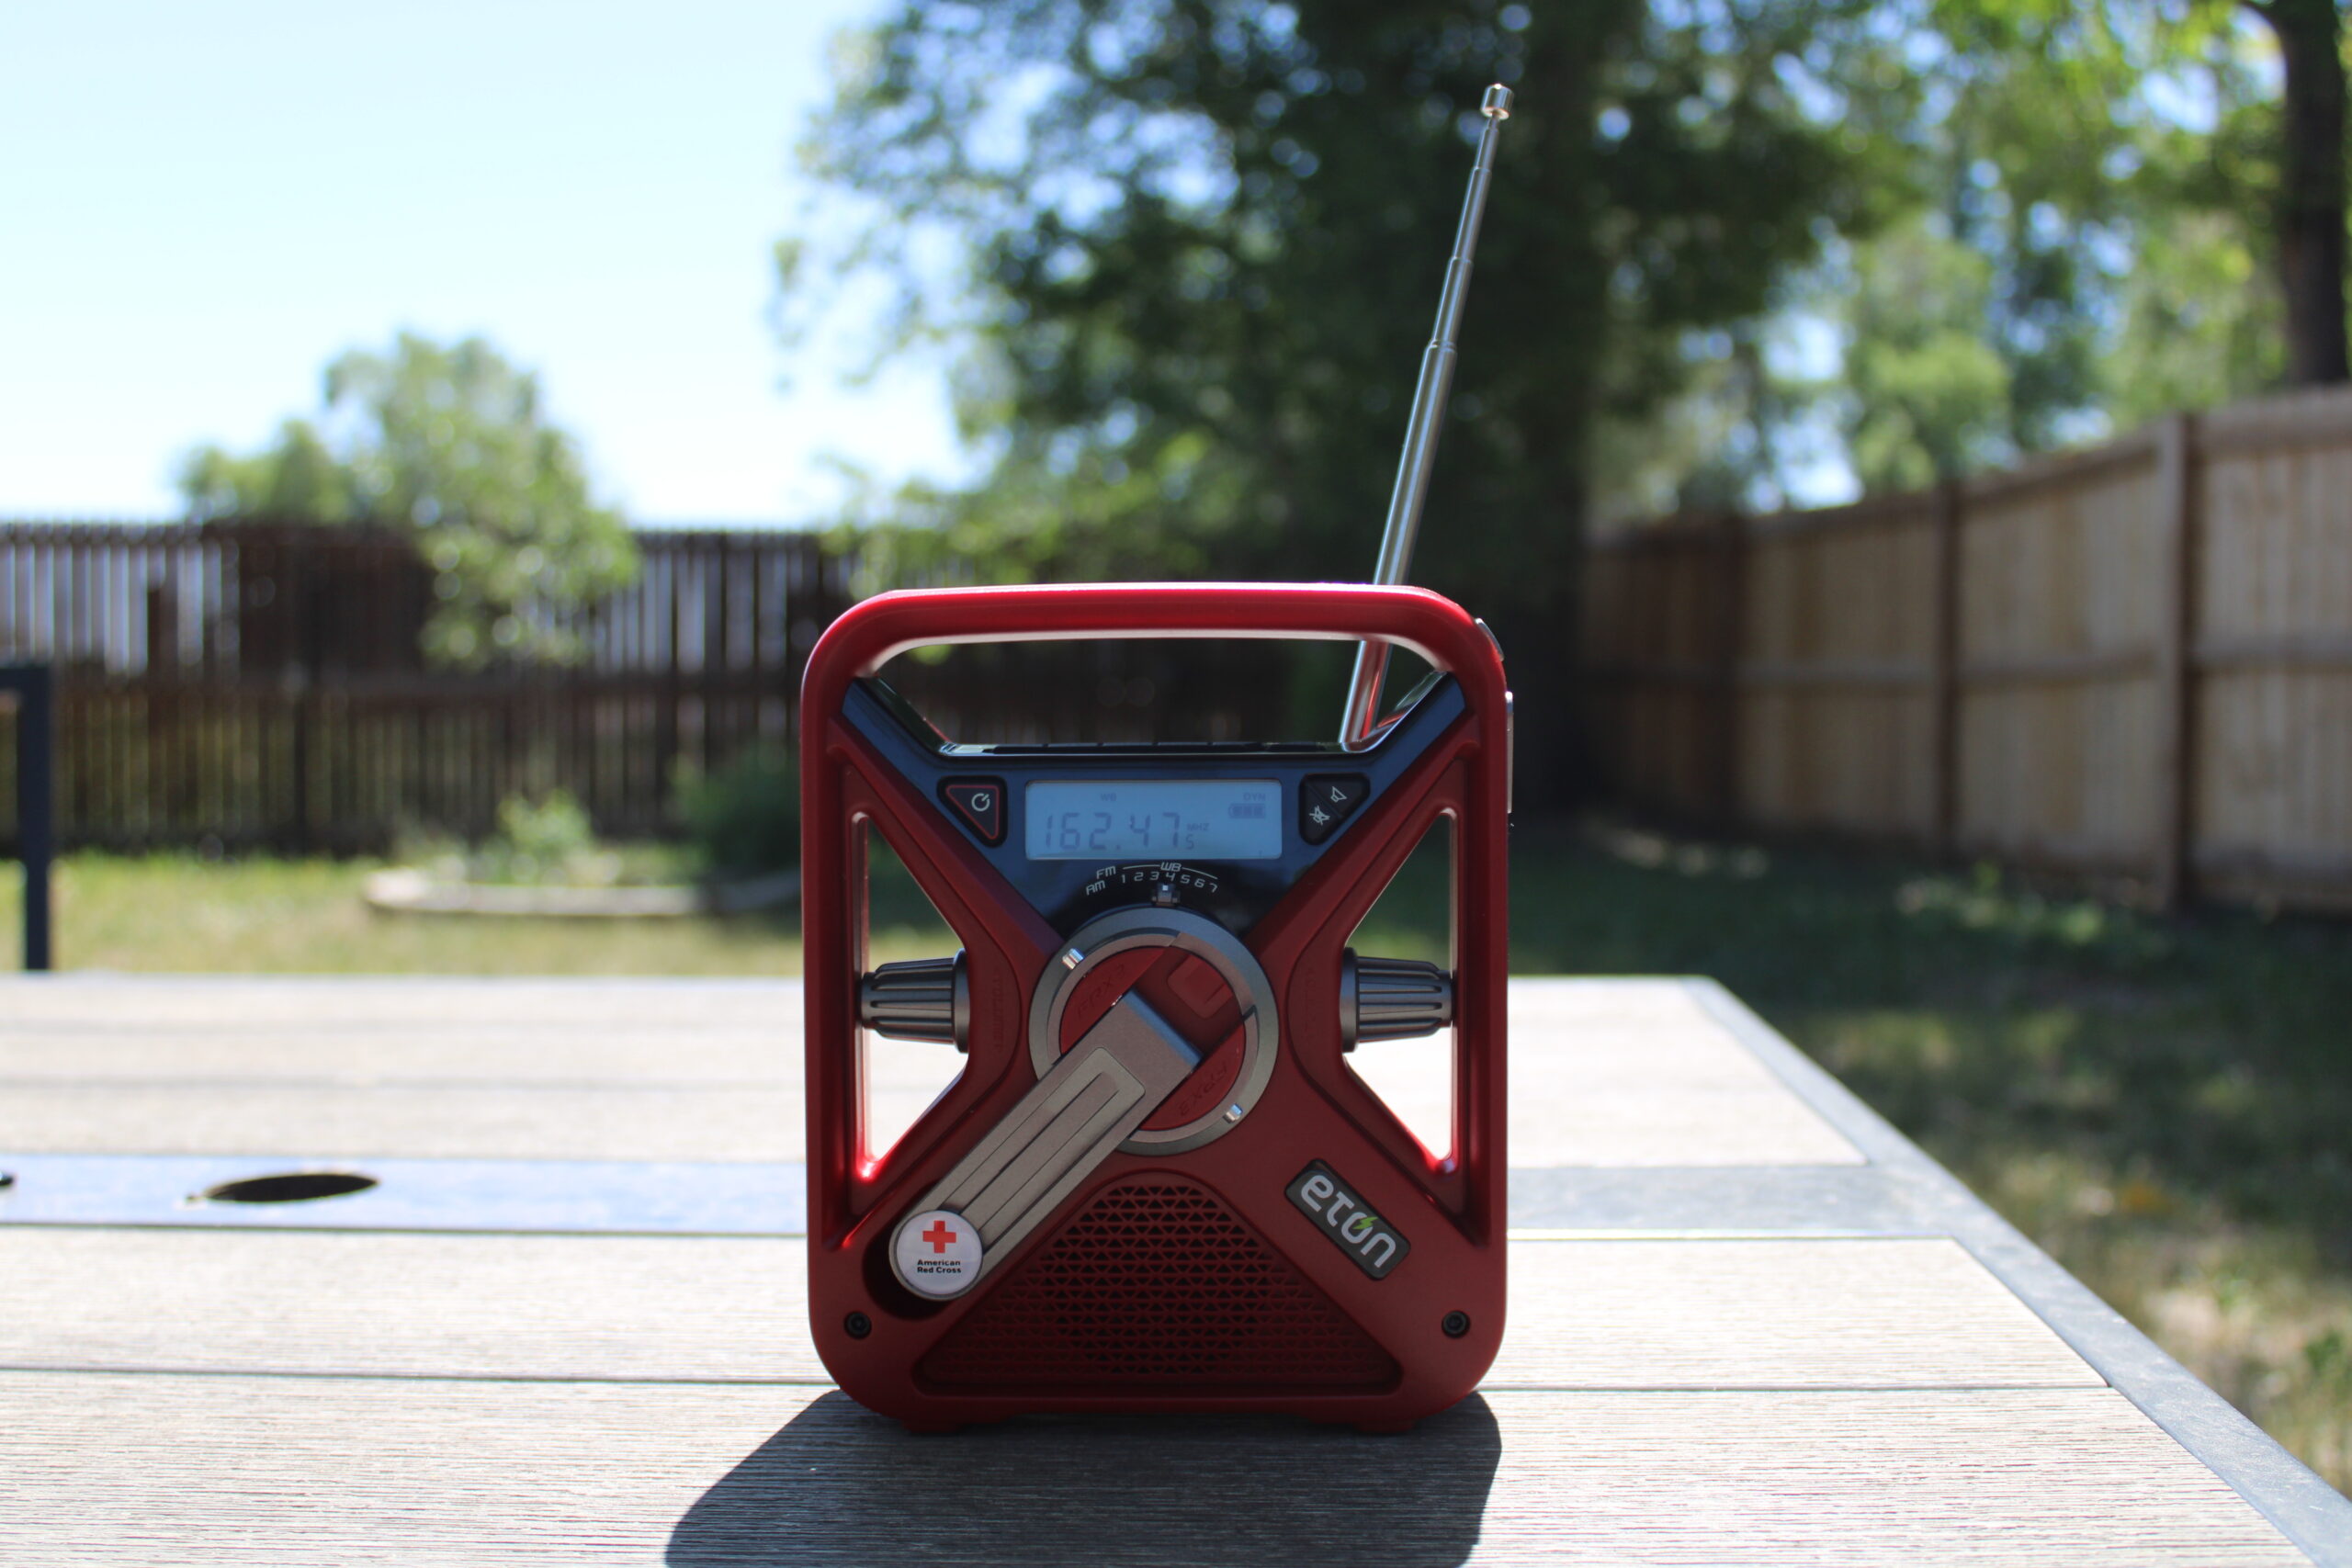 Eton FRX3+ is the best rated emergency radio.